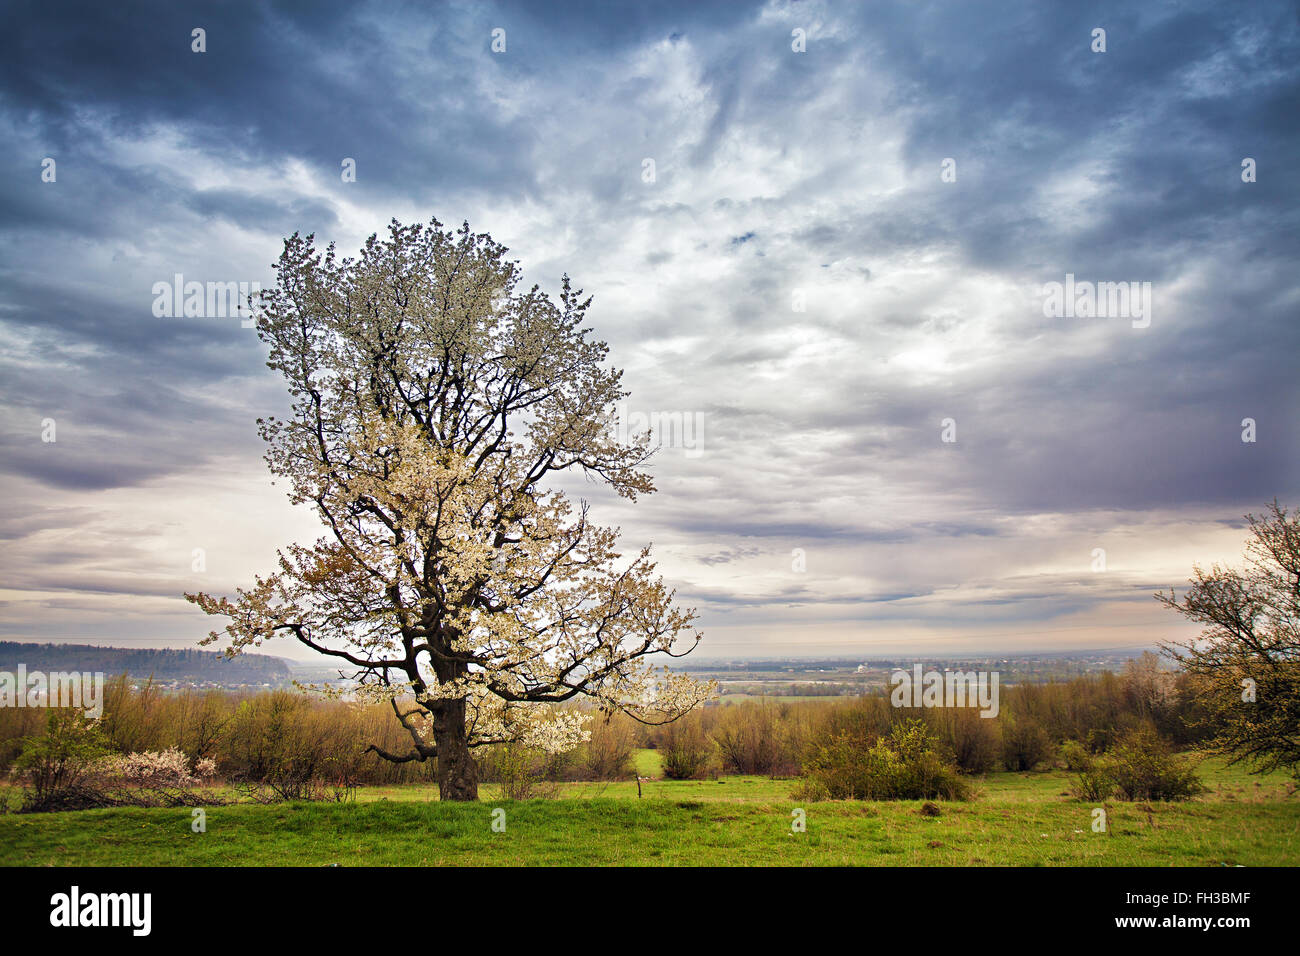 Pear-tree blossoms in spring. April in Carpathians Stock Photo